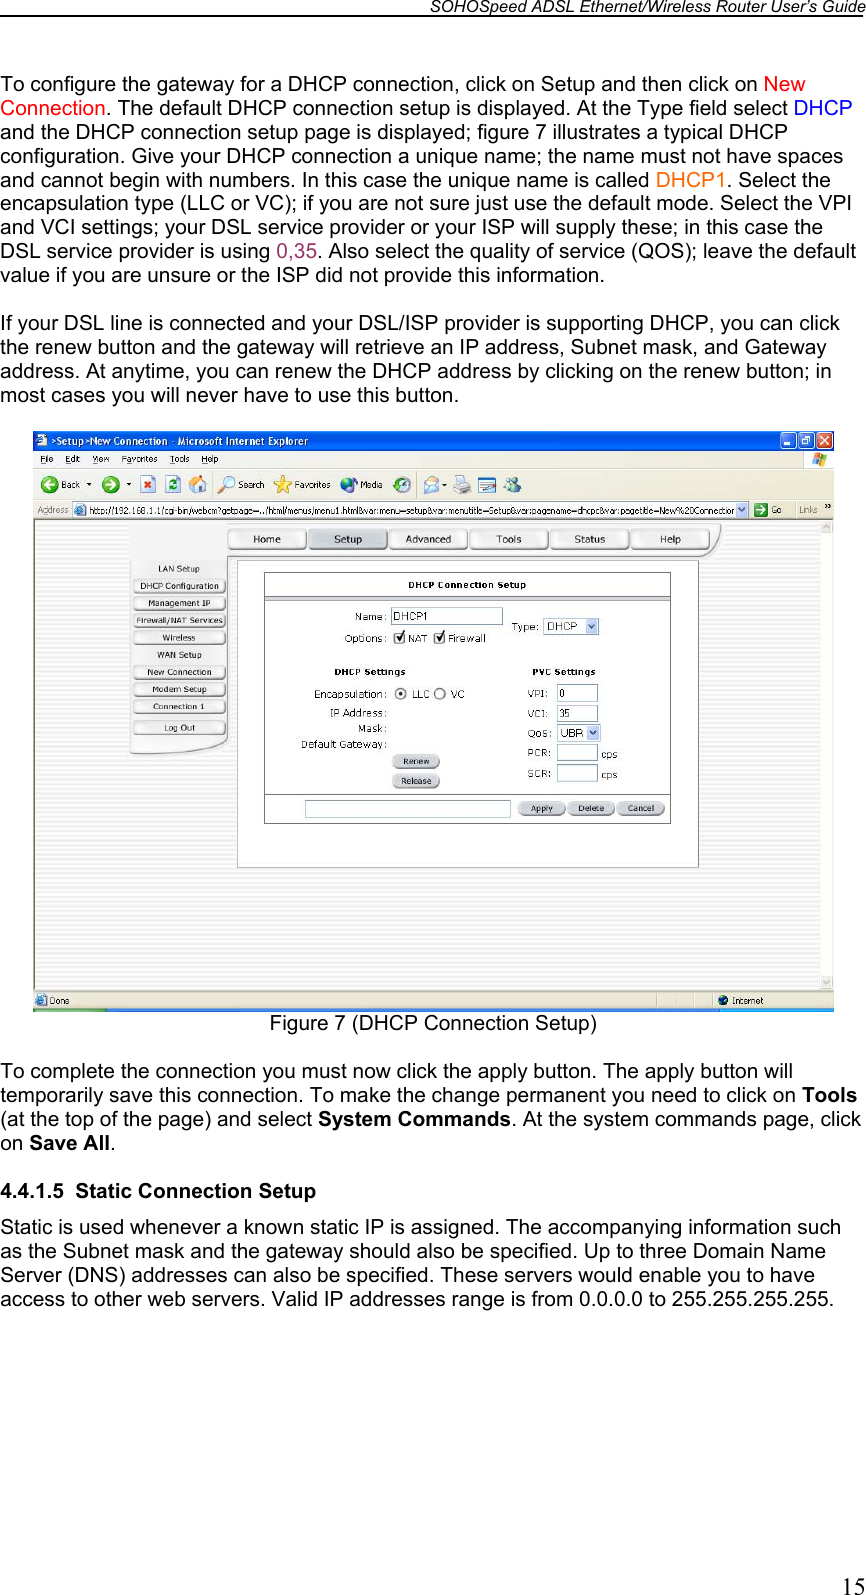 SOHOSpeed ADSL Ethernet/Wireless Router User’s Guide   15 To configure the gateway for a DHCP connection, click on Setup and then click on New Connection. The default DHCP connection setup is displayed. At the Type field select DHCP and the DHCP connection setup page is displayed; figure 7 illustrates a typical DHCP configuration. Give your DHCP connection a unique name; the name must not have spaces and cannot begin with numbers. In this case the unique name is called DHCP1. Select the encapsulation type (LLC or VC); if you are not sure just use the default mode. Select the VPI and VCI settings; your DSL service provider or your ISP will supply these; in this case the DSL service provider is using 0,35. Also select the quality of service (QOS); leave the default value if you are unsure or the ISP did not provide this information.  If your DSL line is connected and your DSL/ISP provider is supporting DHCP, you can click the renew button and the gateway will retrieve an IP address, Subnet mask, and Gateway address. At anytime, you can renew the DHCP address by clicking on the renew button; in most cases you will never have to use this button.   Figure 7 (DHCP Connection Setup)  To complete the connection you must now click the apply button. The apply button will temporarily save this connection. To make the change permanent you need to click on Tools (at the top of the page) and select System Commands. At the system commands page, click on Save All.  4.4.1.5  Static Connection Setup Static is used whenever a known static IP is assigned. The accompanying information such as the Subnet mask and the gateway should also be specified. Up to three Domain Name Server (DNS) addresses can also be specified. These servers would enable you to have access to other web servers. Valid IP addresses range is from 0.0.0.0 to 255.255.255.255.  